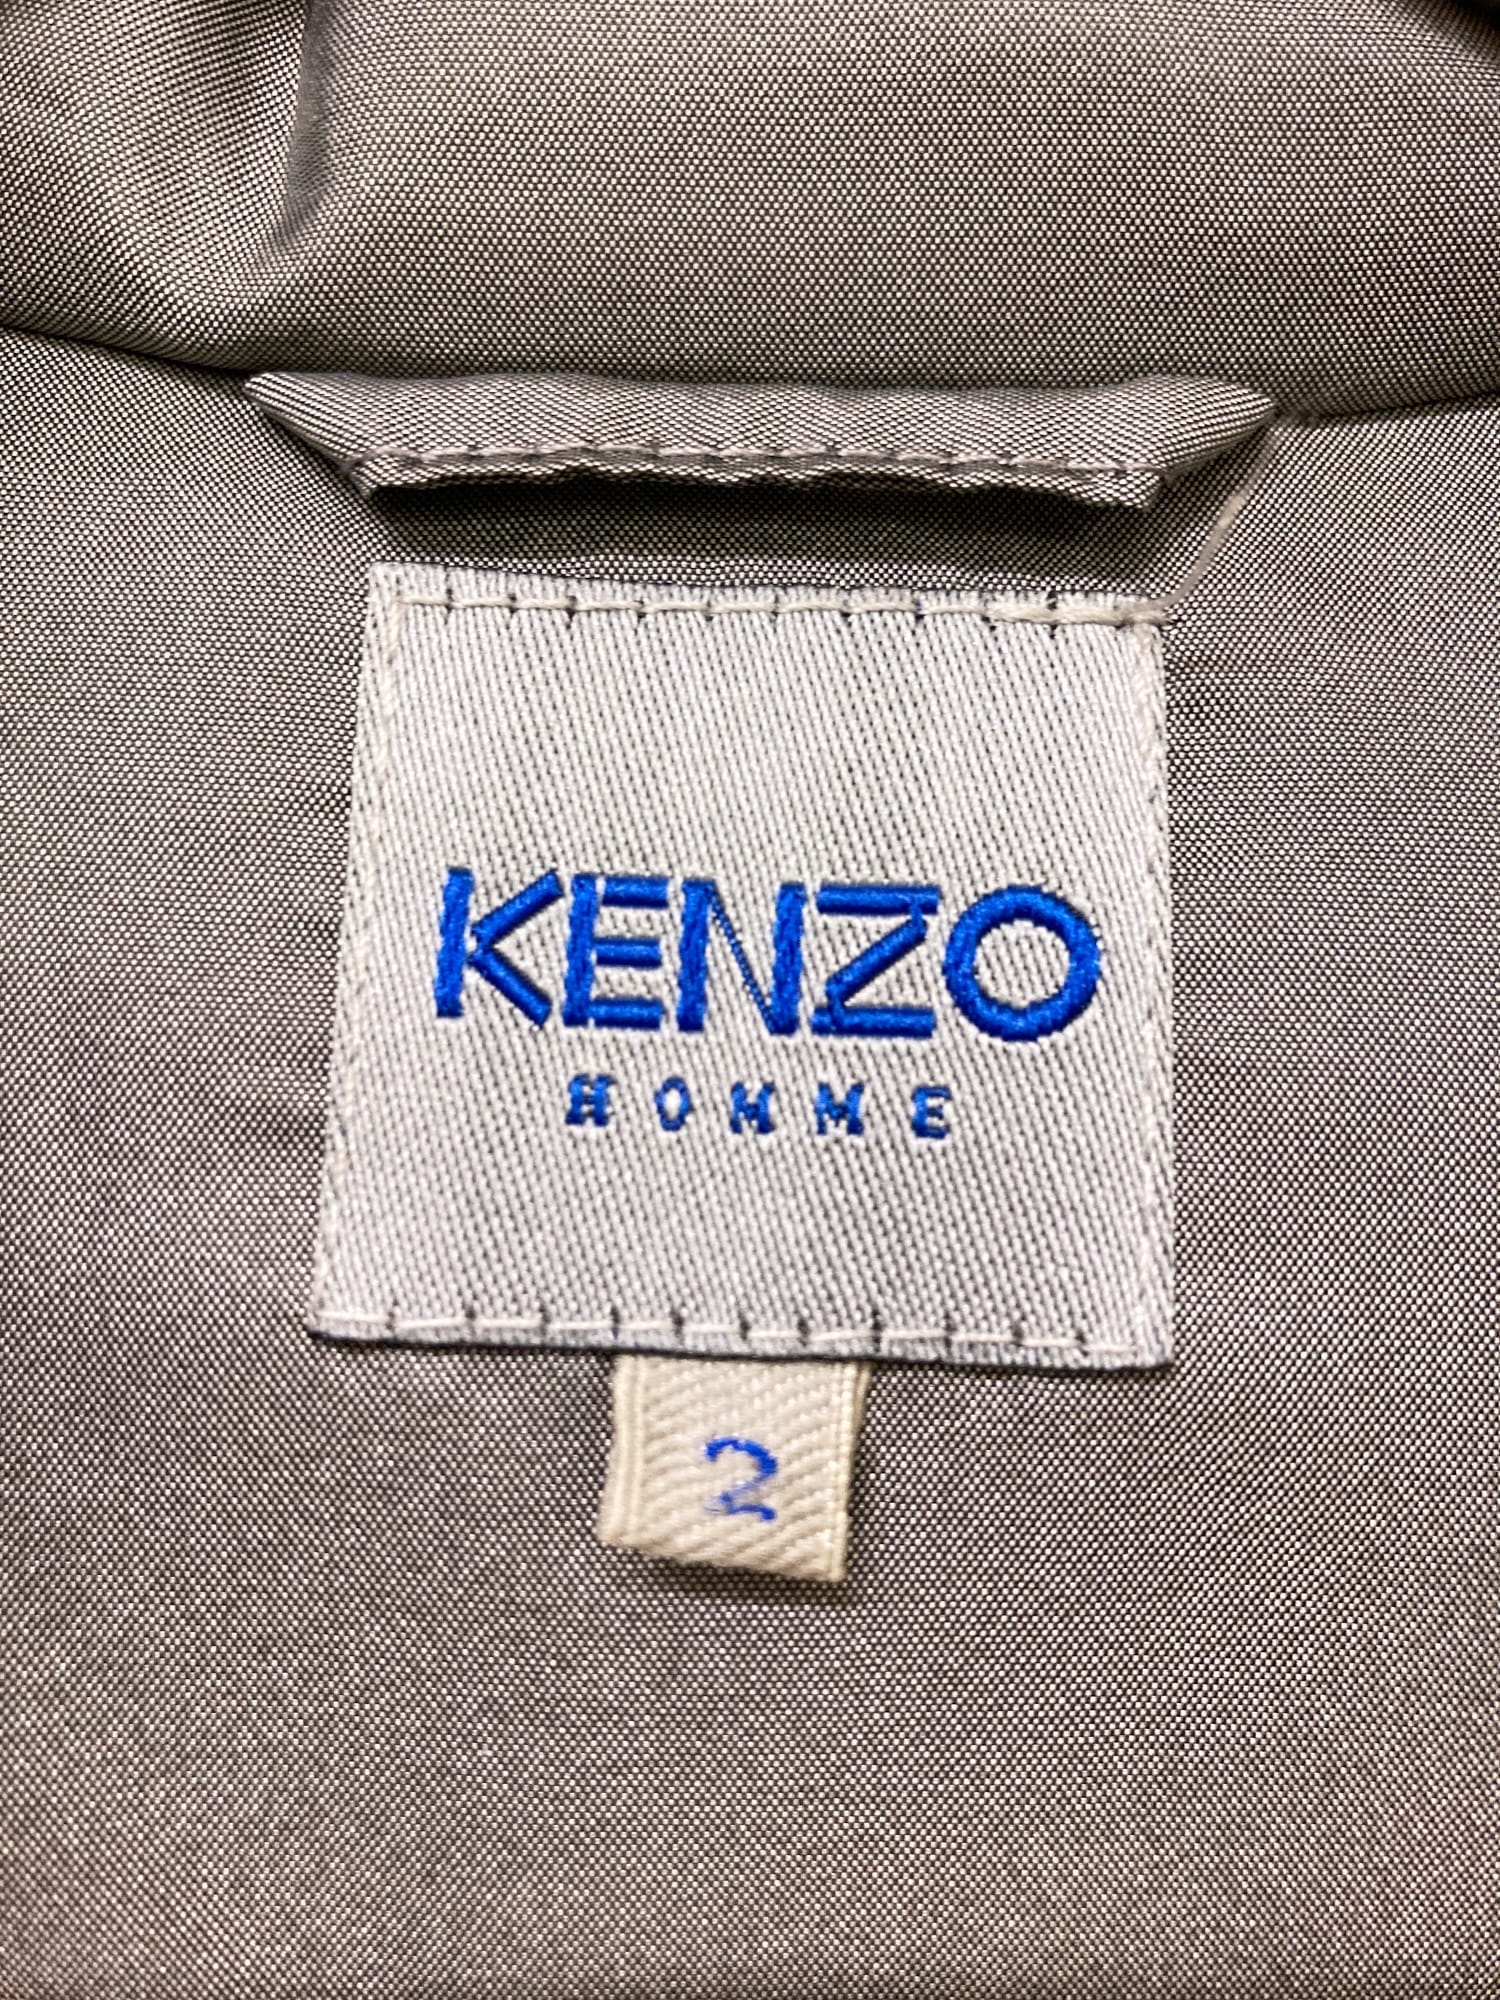 Kenzo Homme 1990s shiny silver down puffer vest - size 2 M